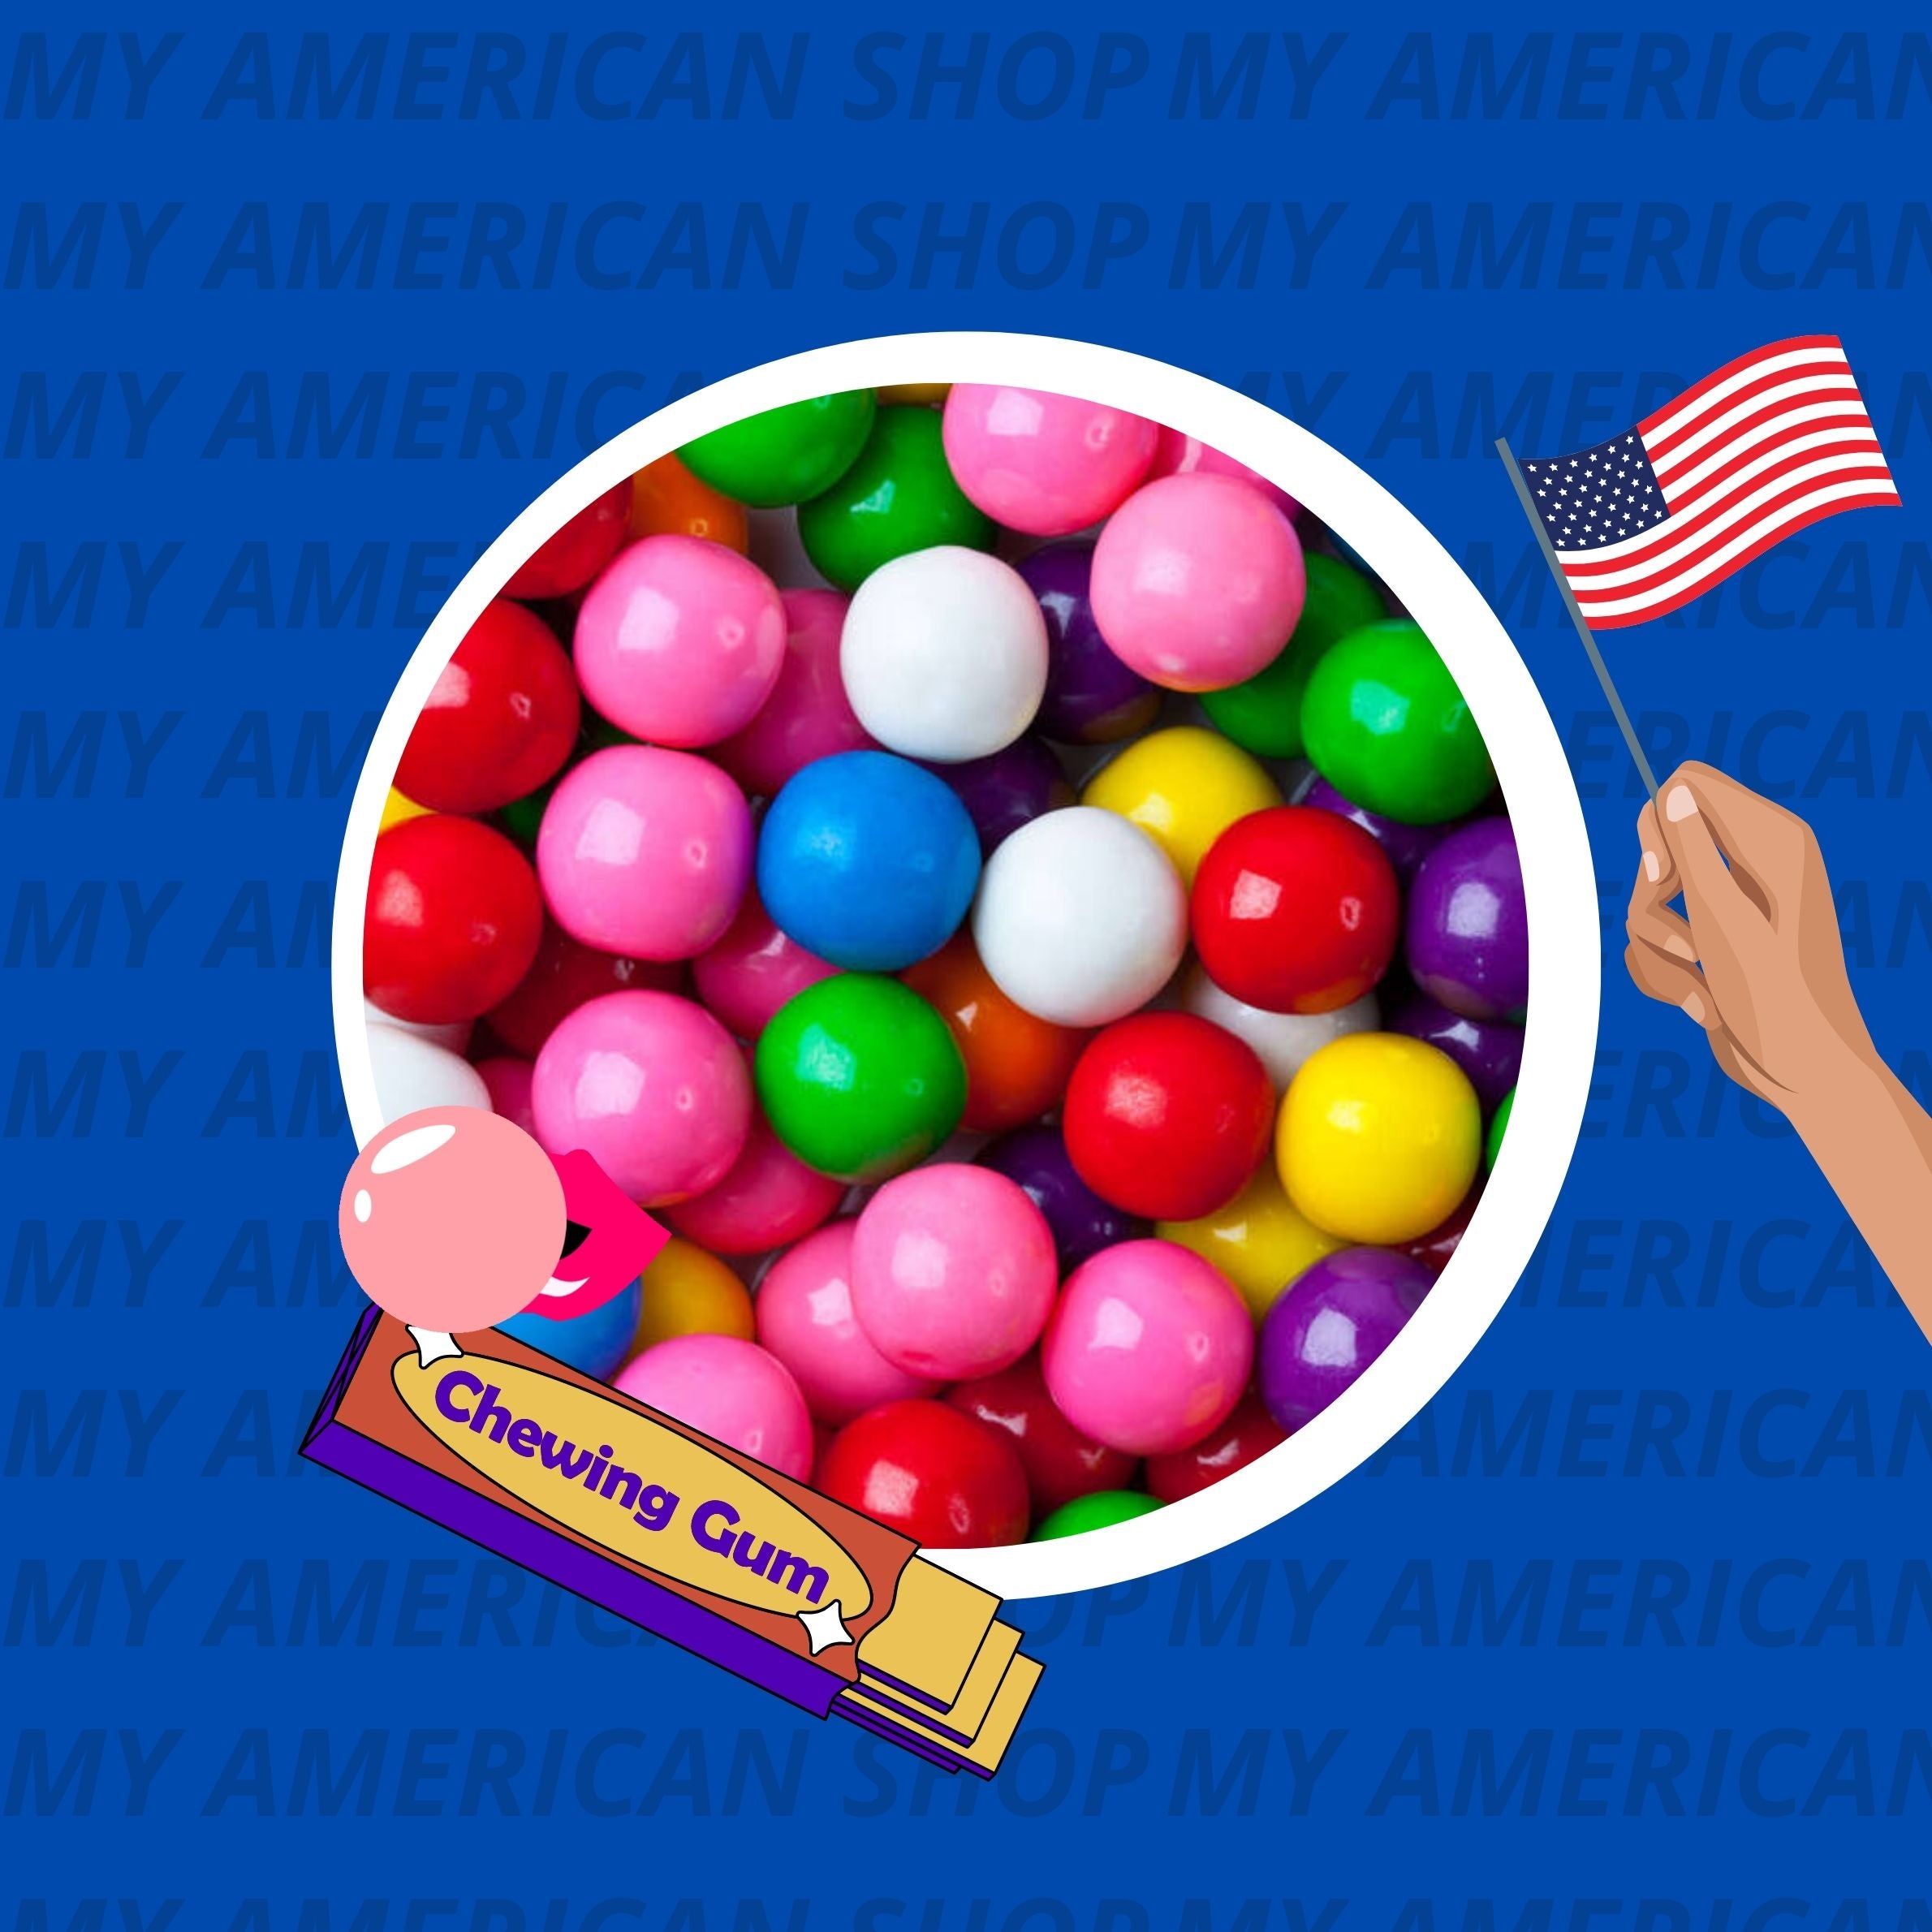 Chewing-gum - My American Shop